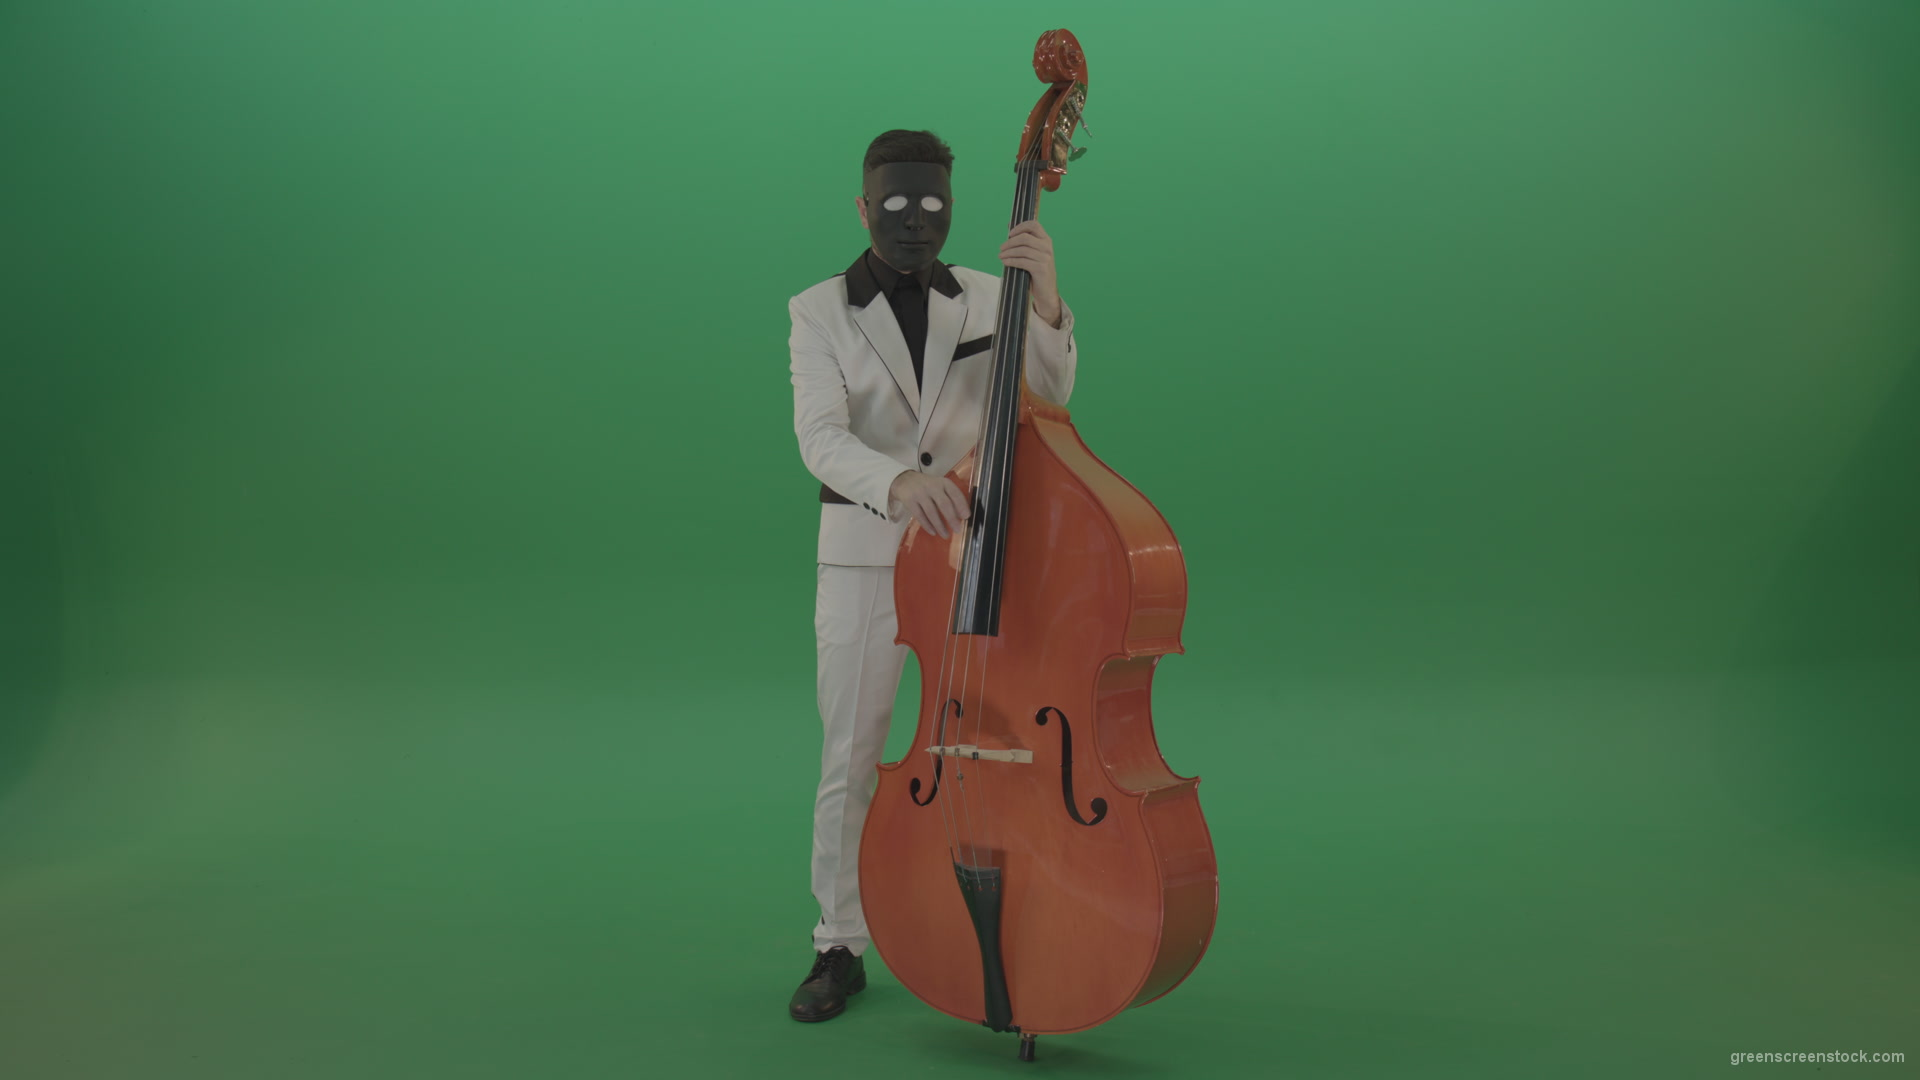 Man-in-white-costume-and-blac-mask-play-jazz-music-on-double-bass-orchestra-music-instument-isolated-on-green-screen_007 Green Screen Stock